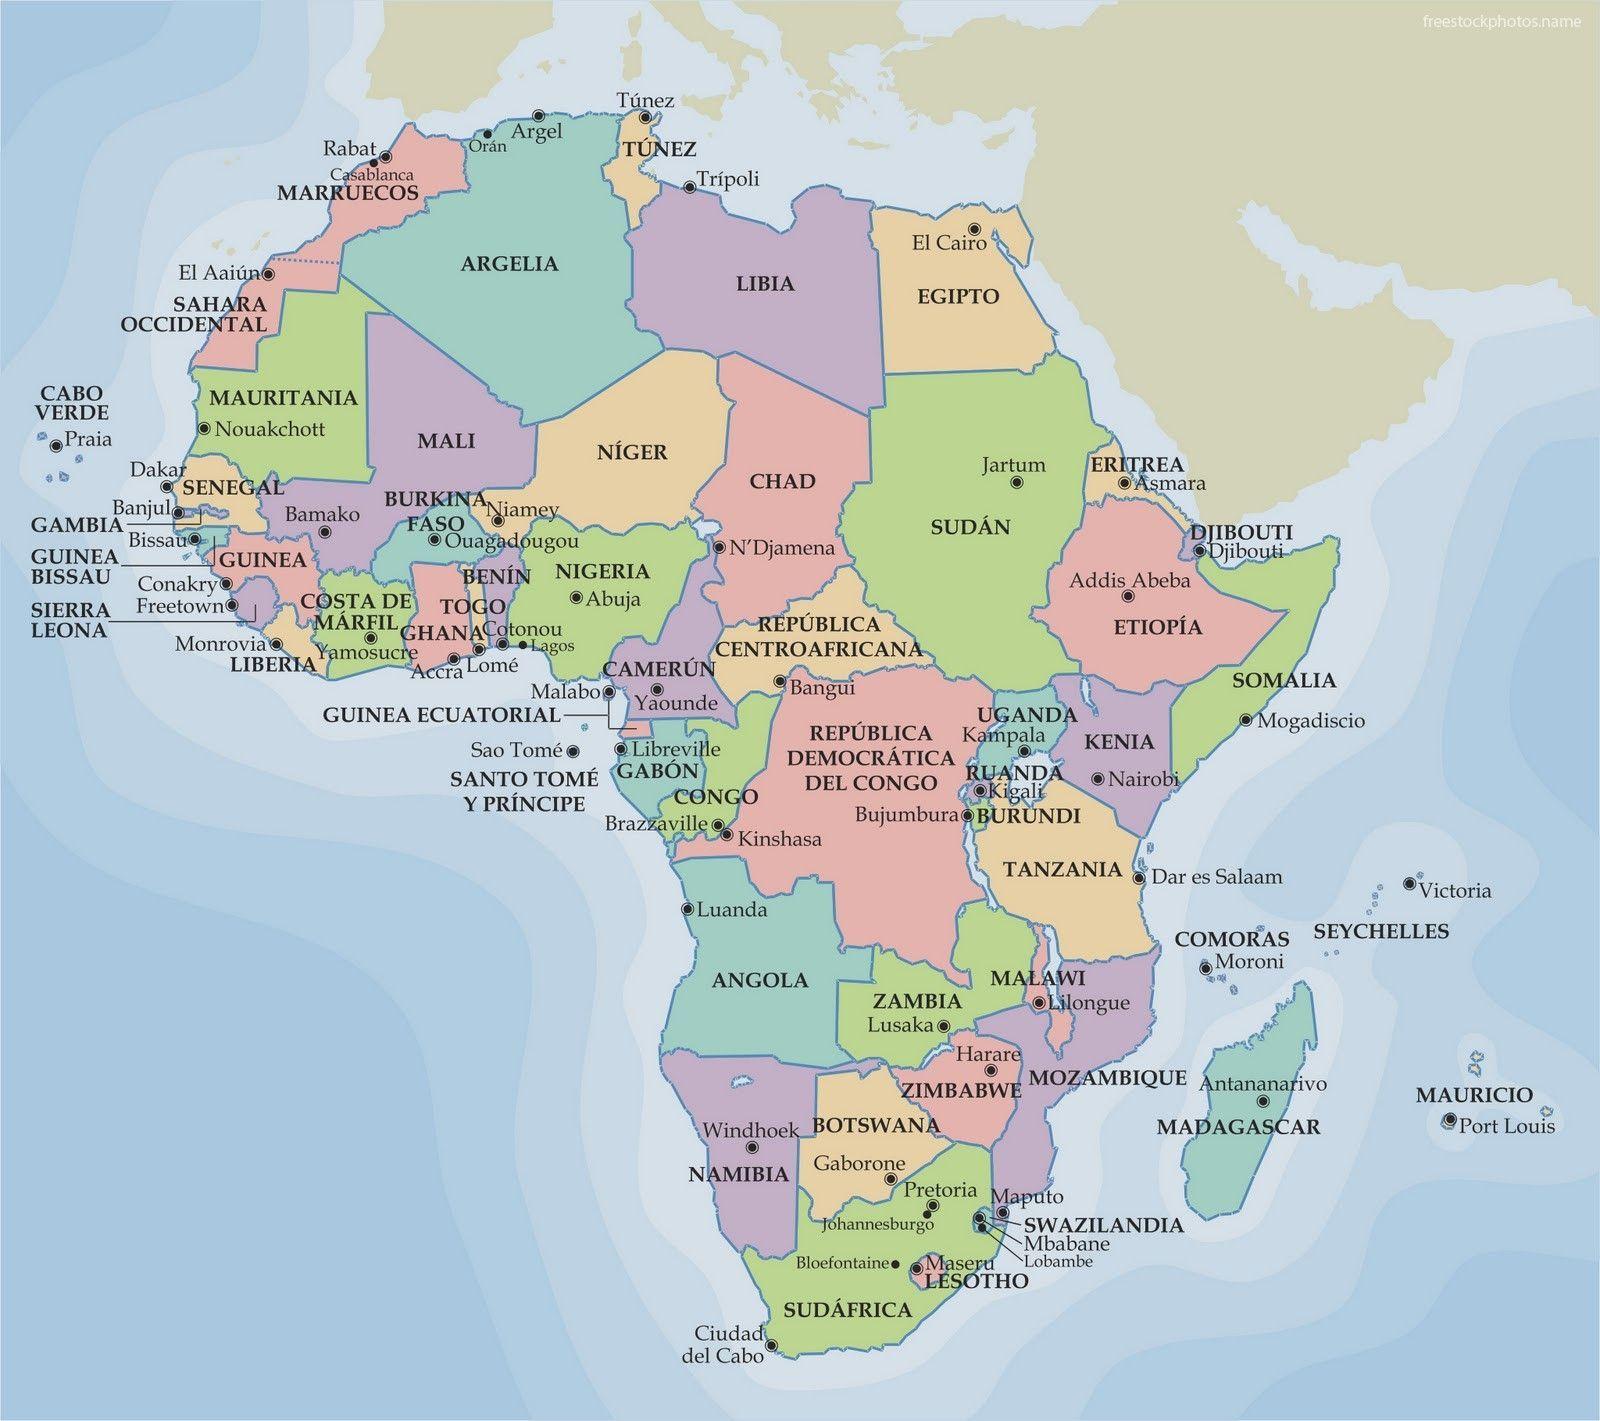 Download of political map of africa image